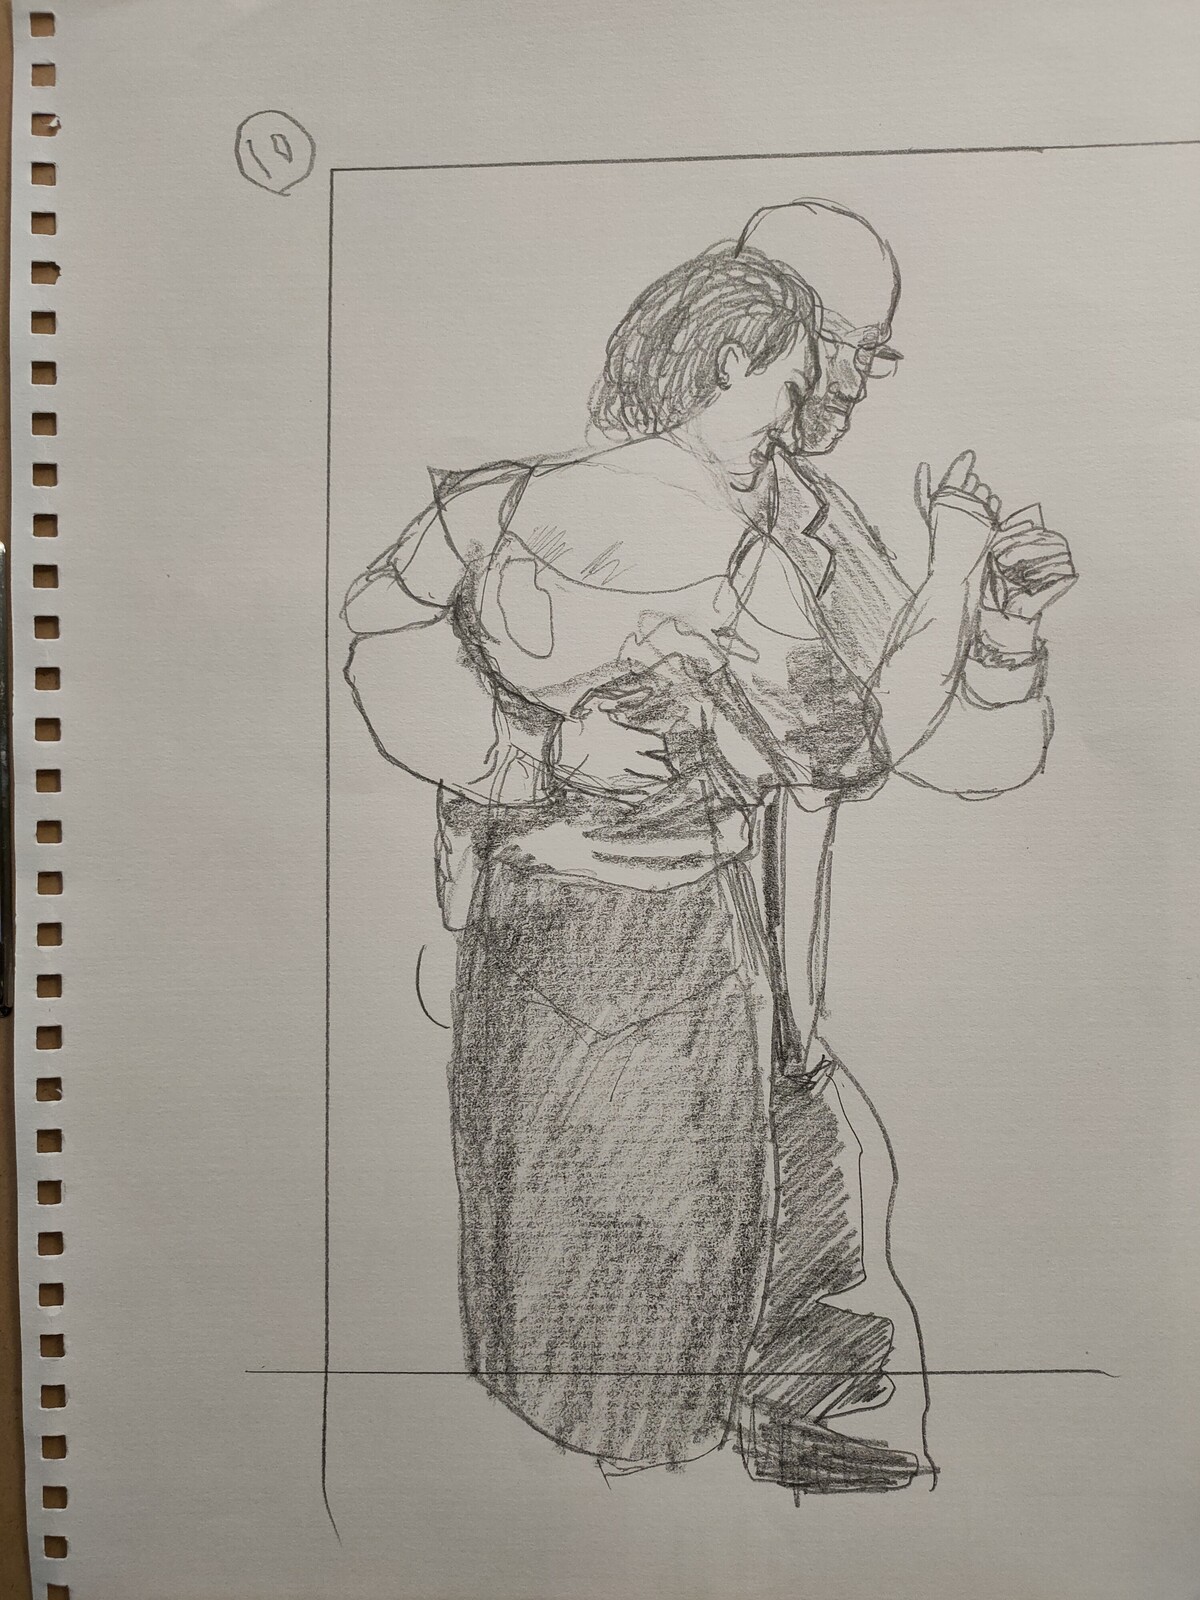 An elderly couple dancing.  A Life drawing from reference presented in Bobby Chiu's Youtube video "90MAC Life Drawing Class - DANCING"